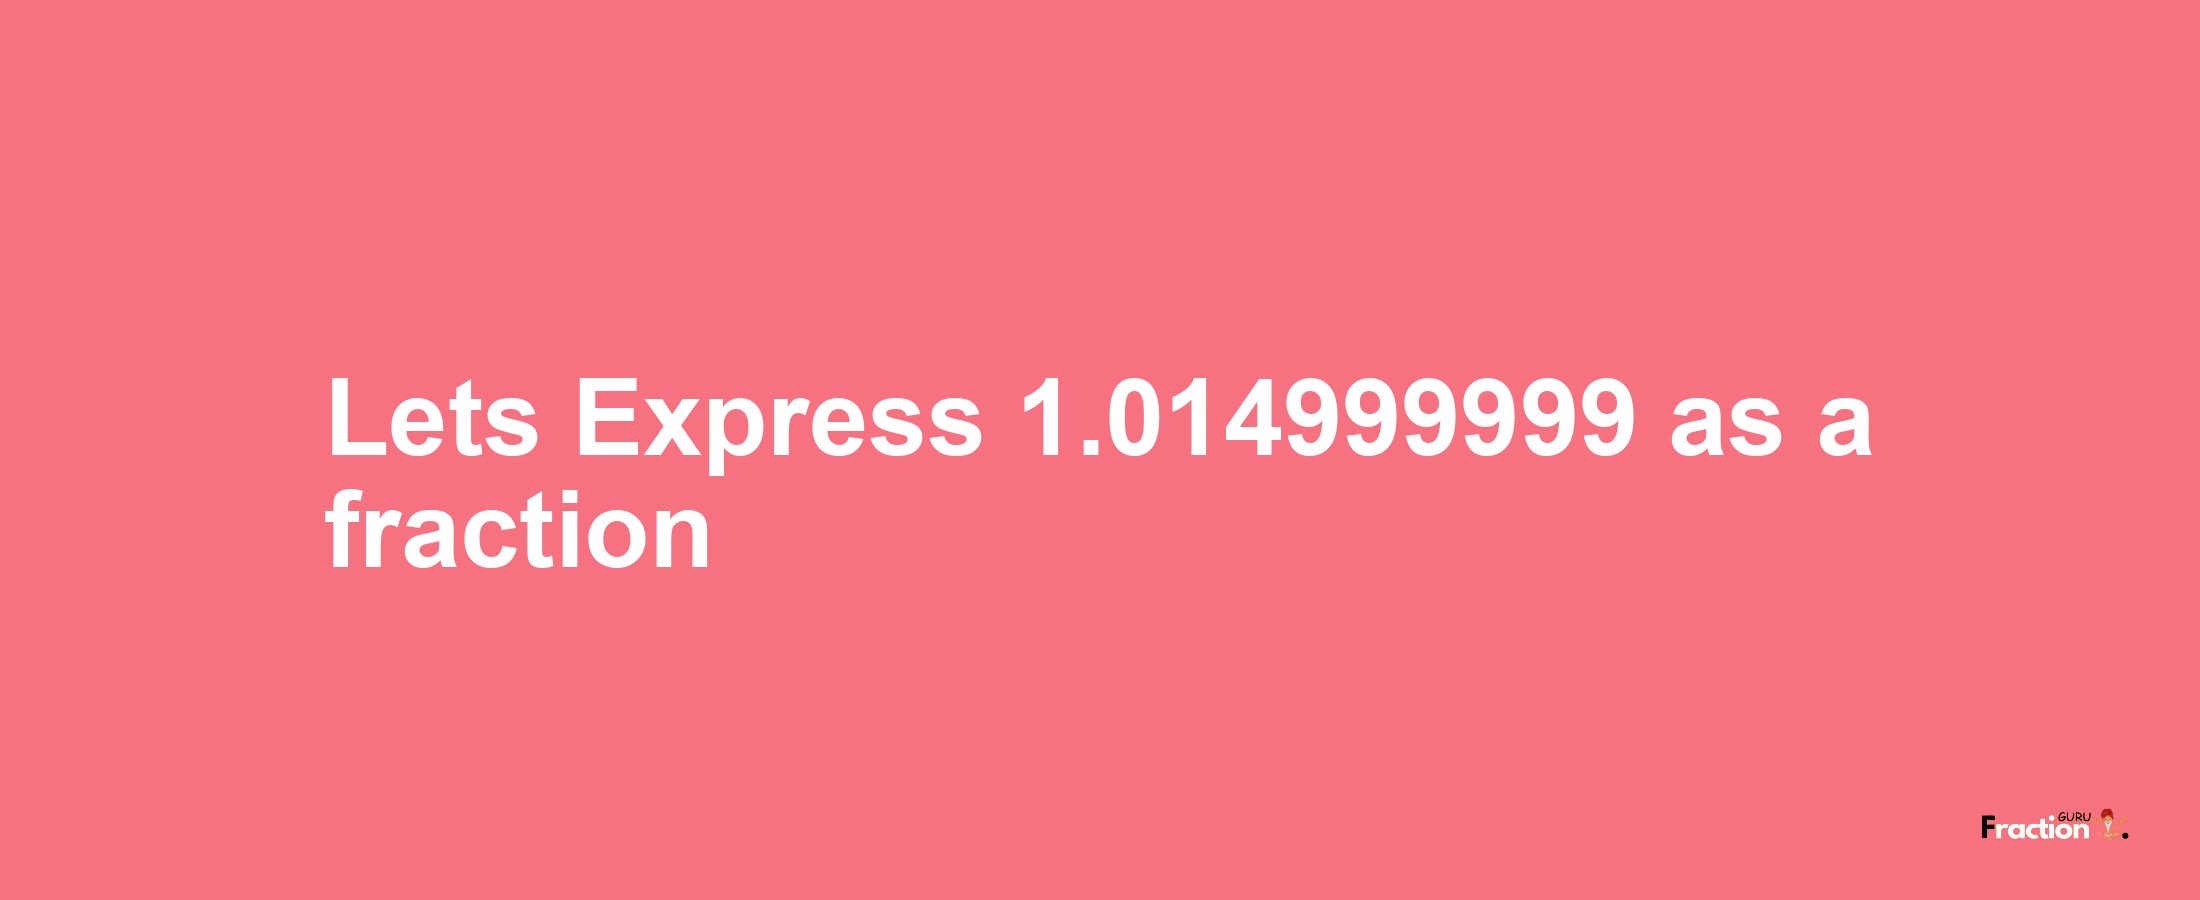 Lets Express 1.014999999 as afraction